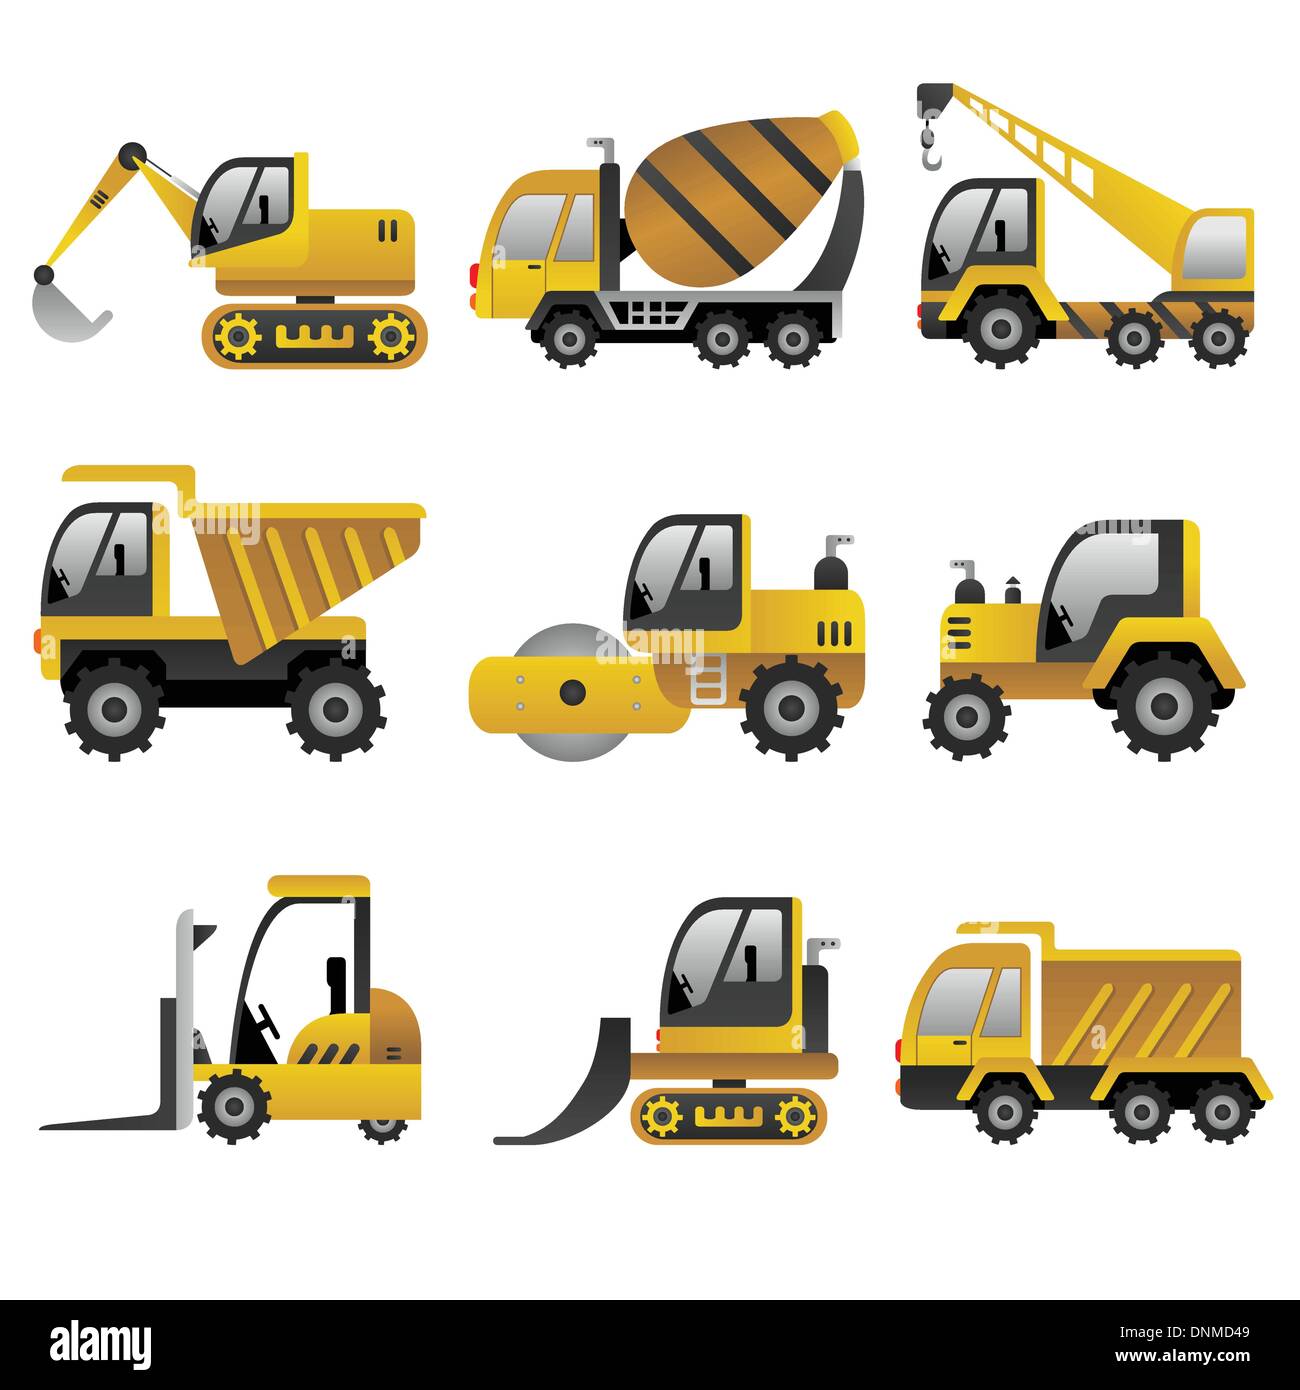 A vector illustration of big construction vehicles icon sets Stock Vector